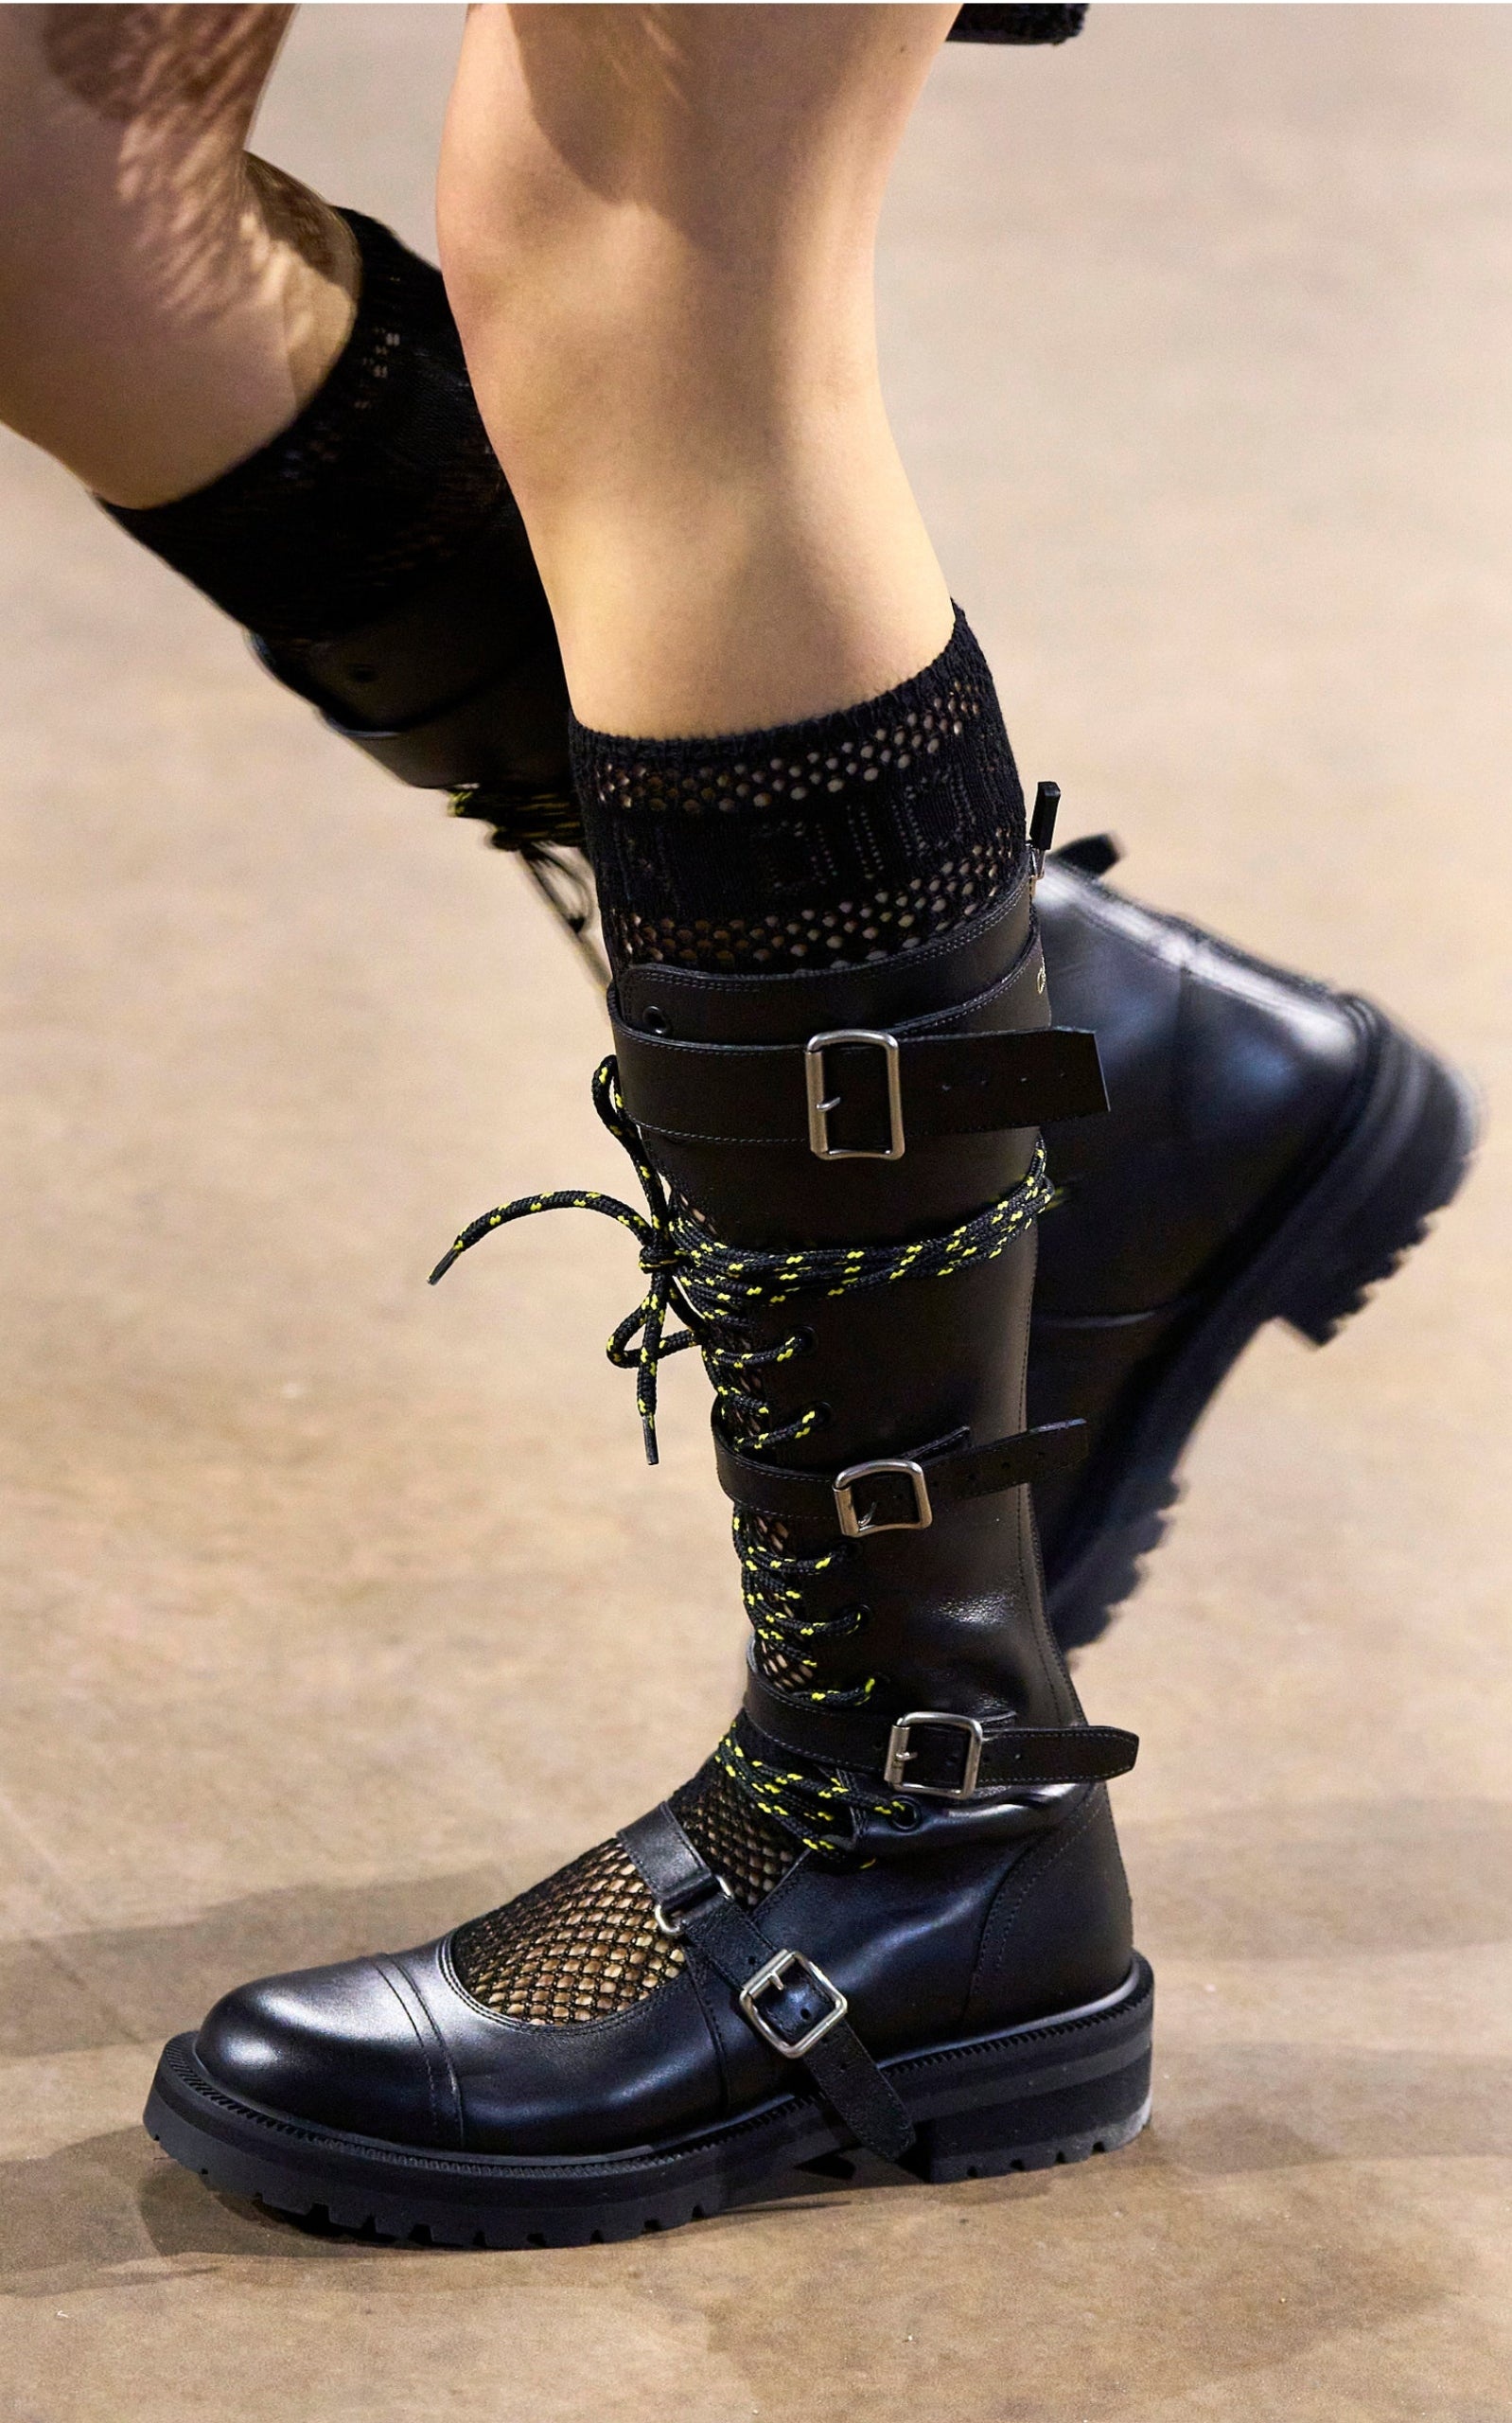 Dioranger Boots in Black Technical Fabric - 2